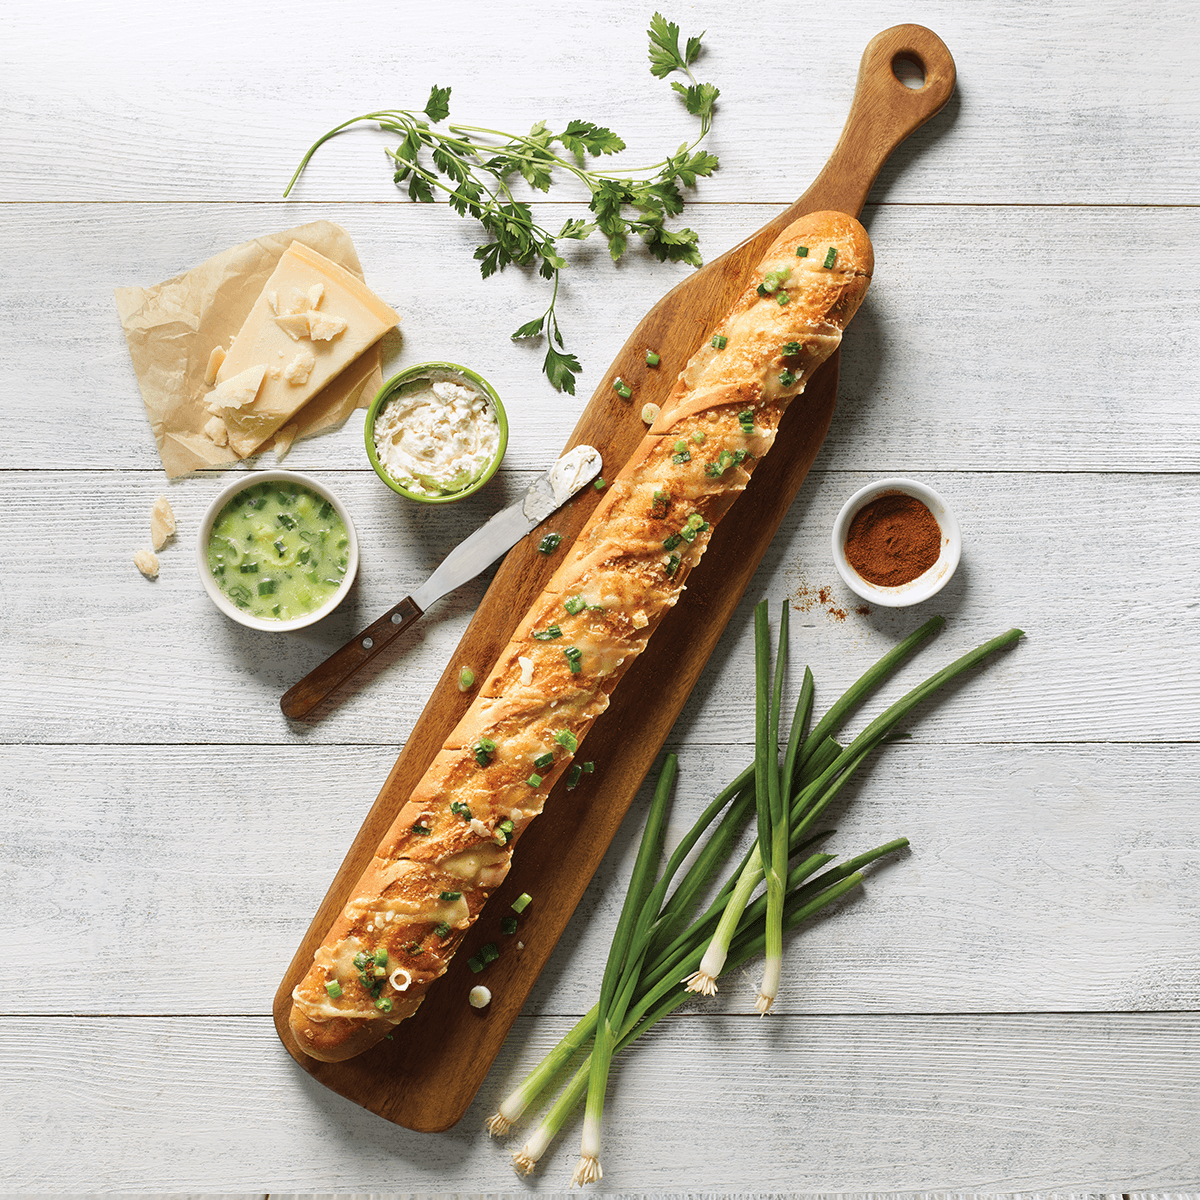 French Baguette - BBQ recipe with melted cheese, green onions and garlic butter